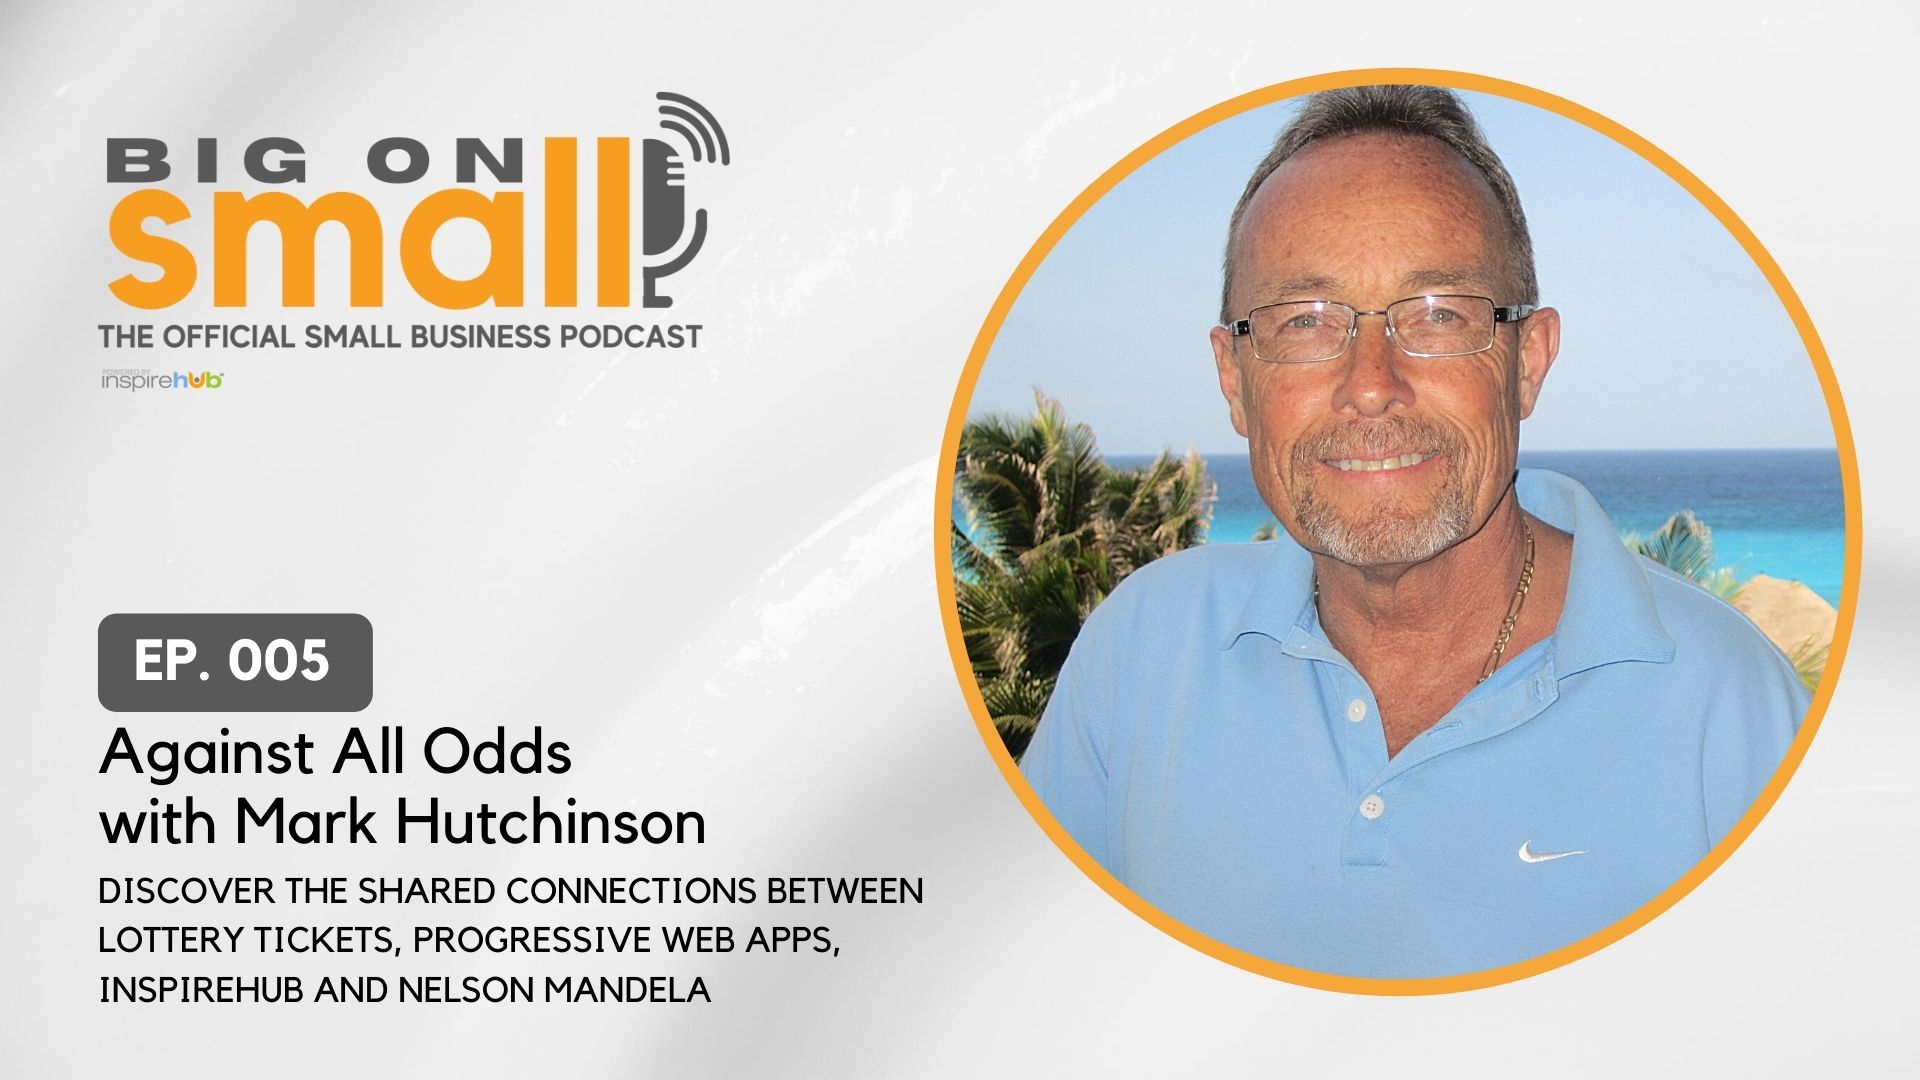 Big on Small: The Official Small Business Podcast | Episode 005 | Against All Odds with Mark Hutchinson.